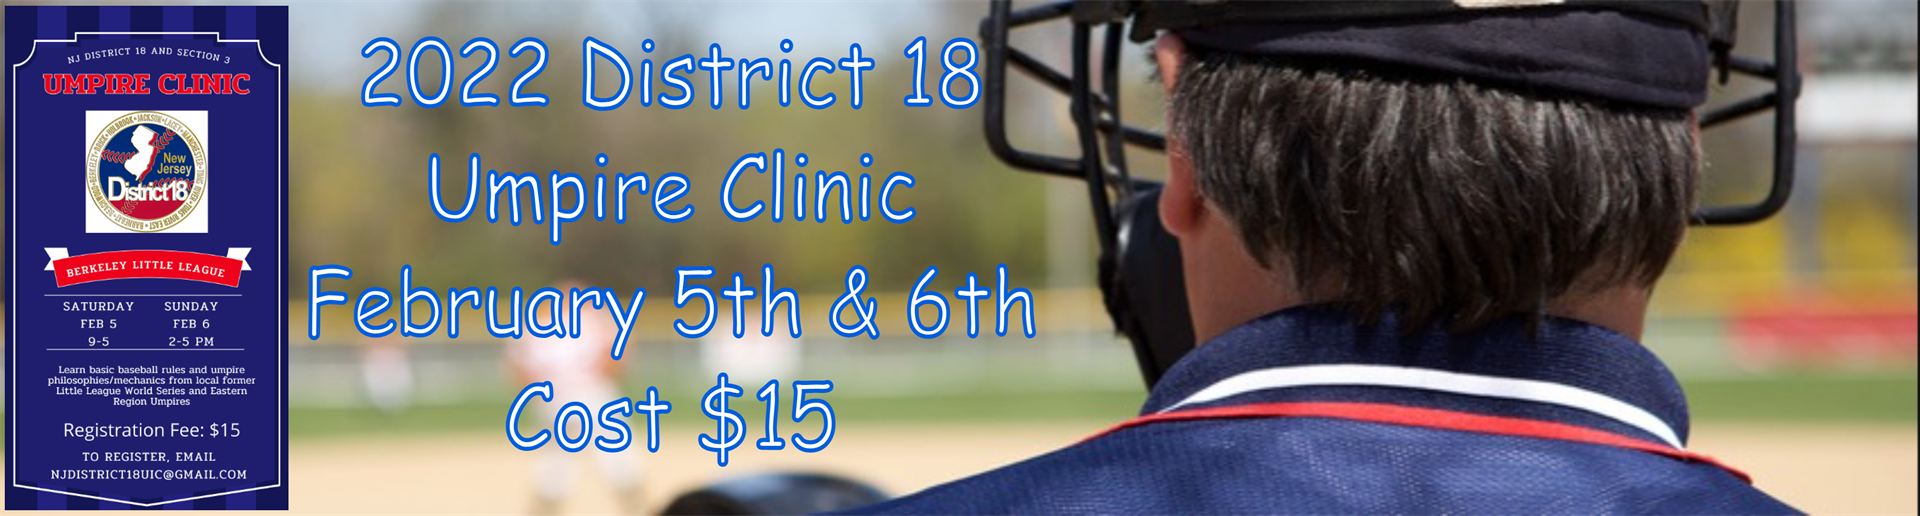 2022 District 18 Umpire Clinic